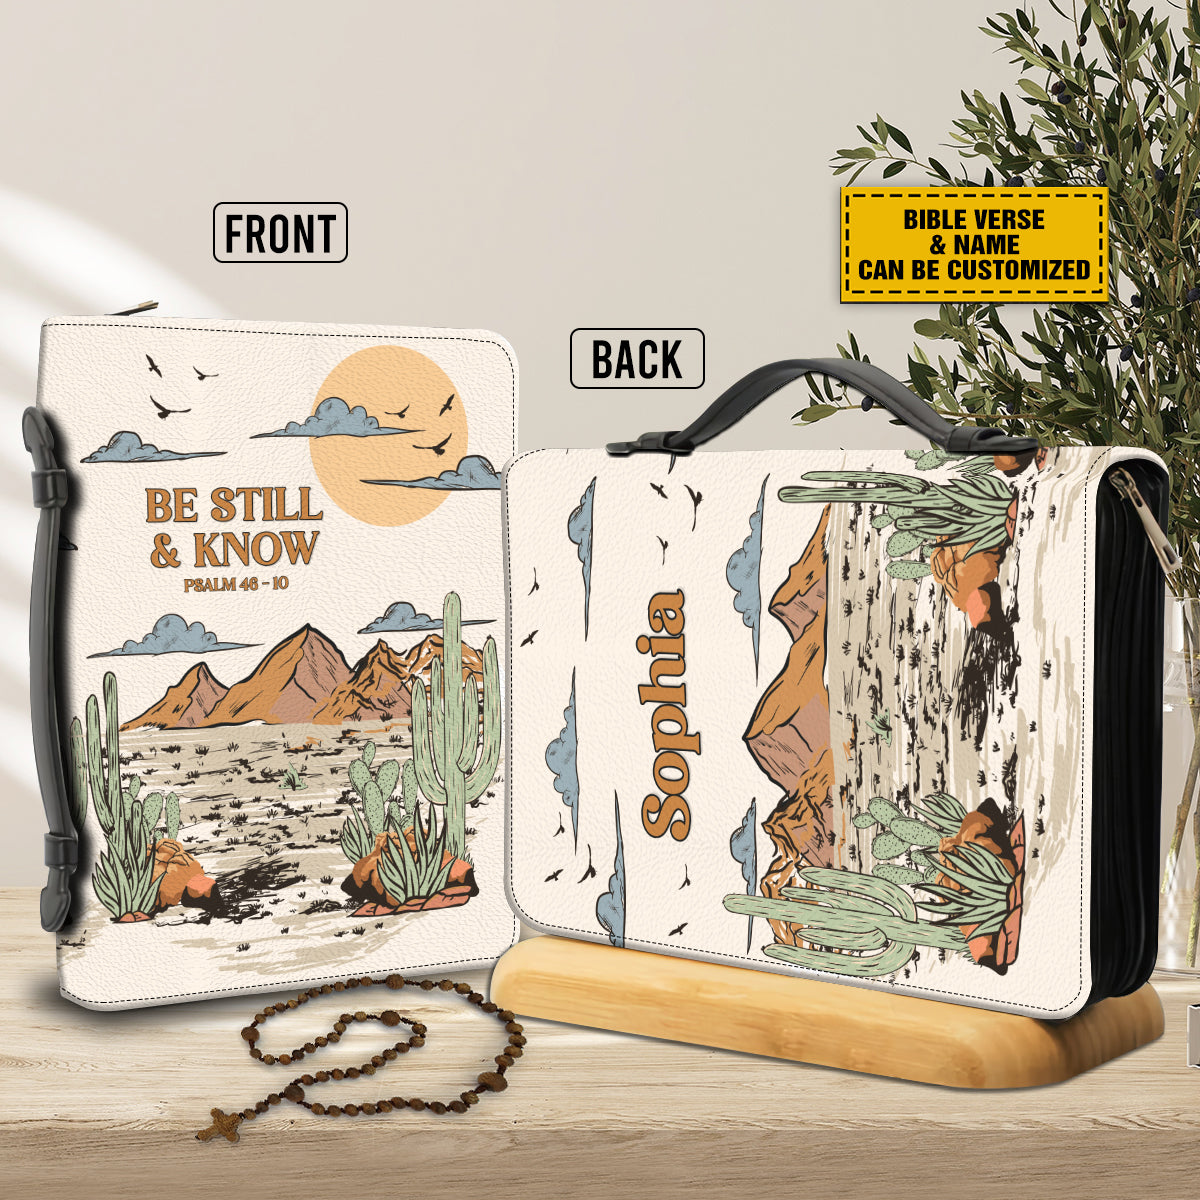 Teesdily | Personalized Desert Cactus Bible Study, Be Still And Know That I Am God Bible Book Cover, Christian Cowboy Cowgirl Bible Cover With Handle